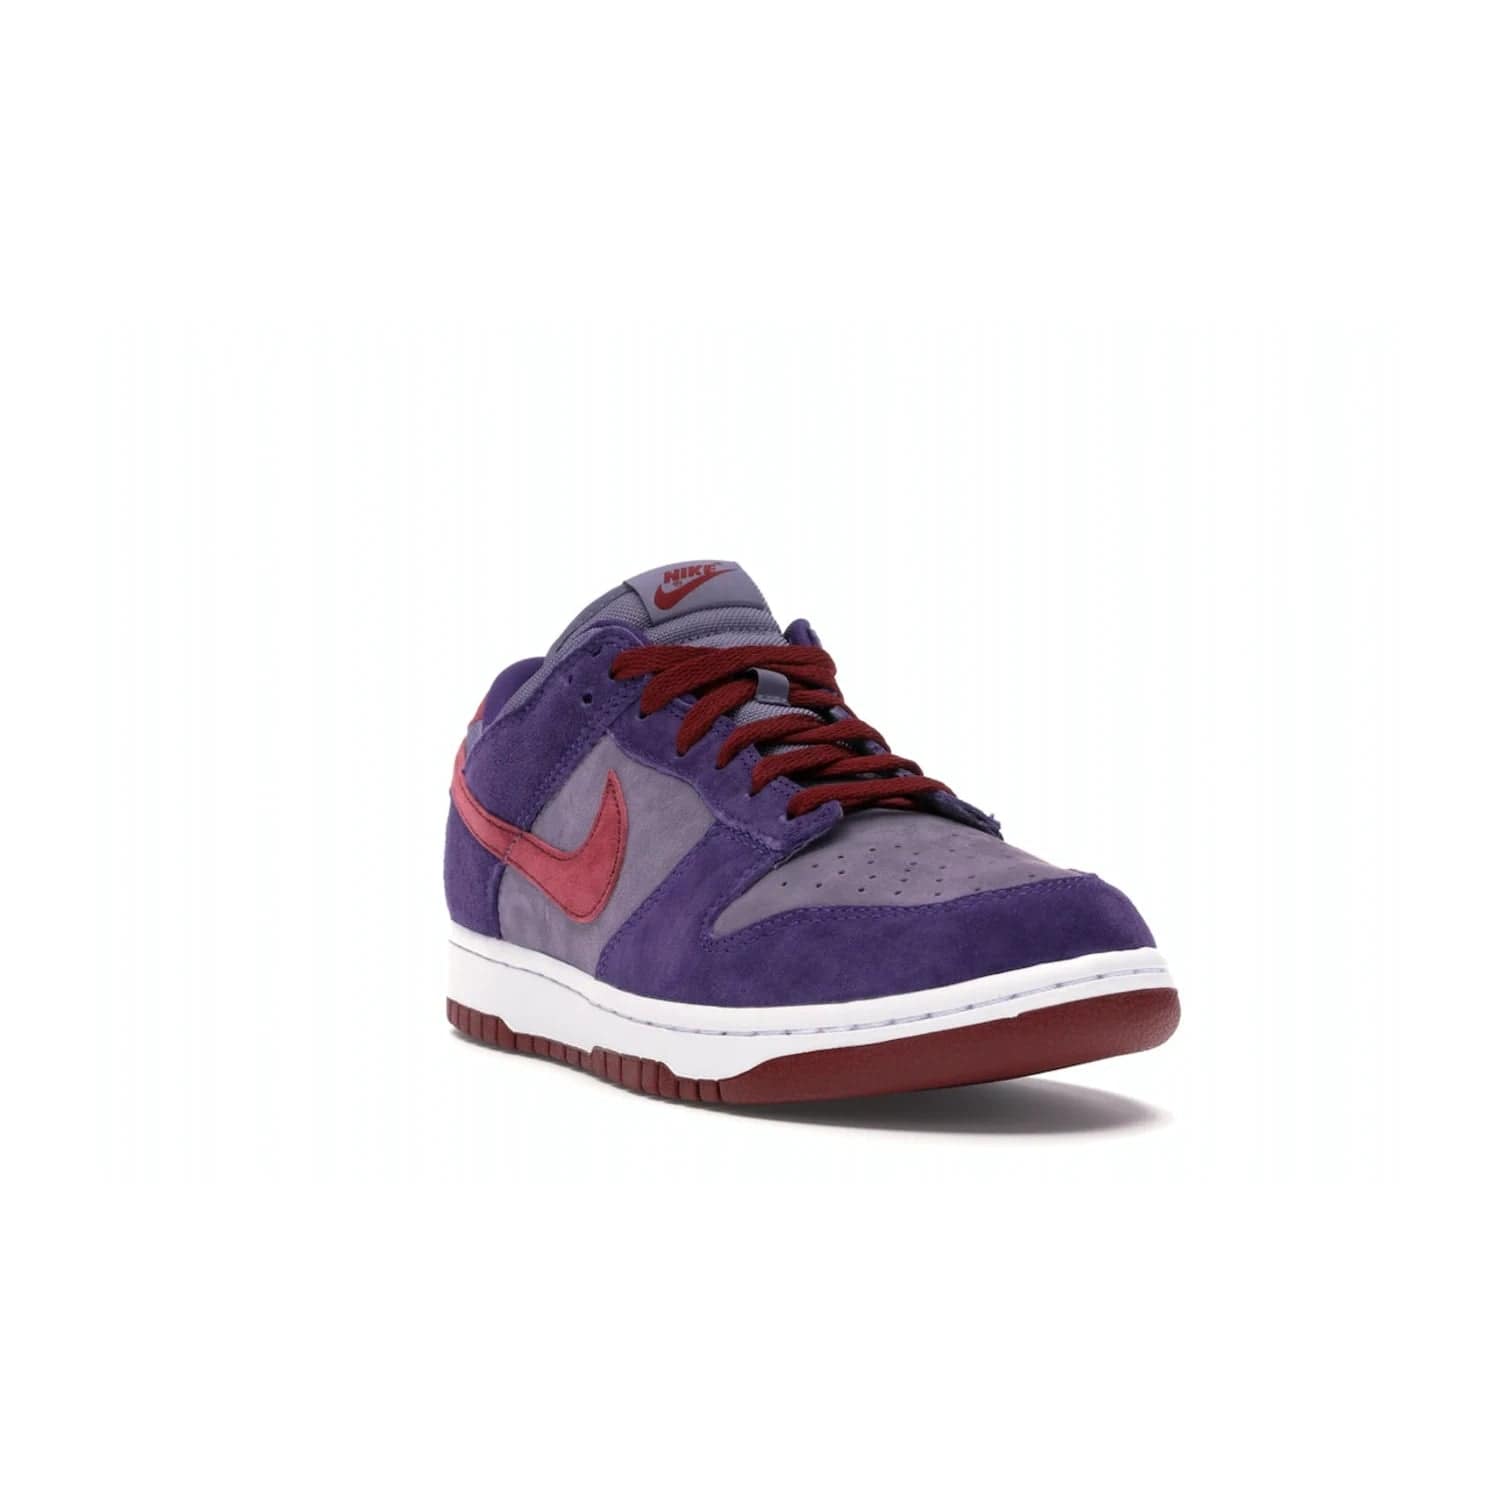 Nike Dunk Low Plum (2020) - Image 7 - Only at www.BallersClubKickz.com - Elevate your look with the Nike Dunk Low Plum (2020). Featuring a bold purple colorway, this retro-inspired silhouette is constructed of premium suede and makes for a must-have for any sneakerhead.